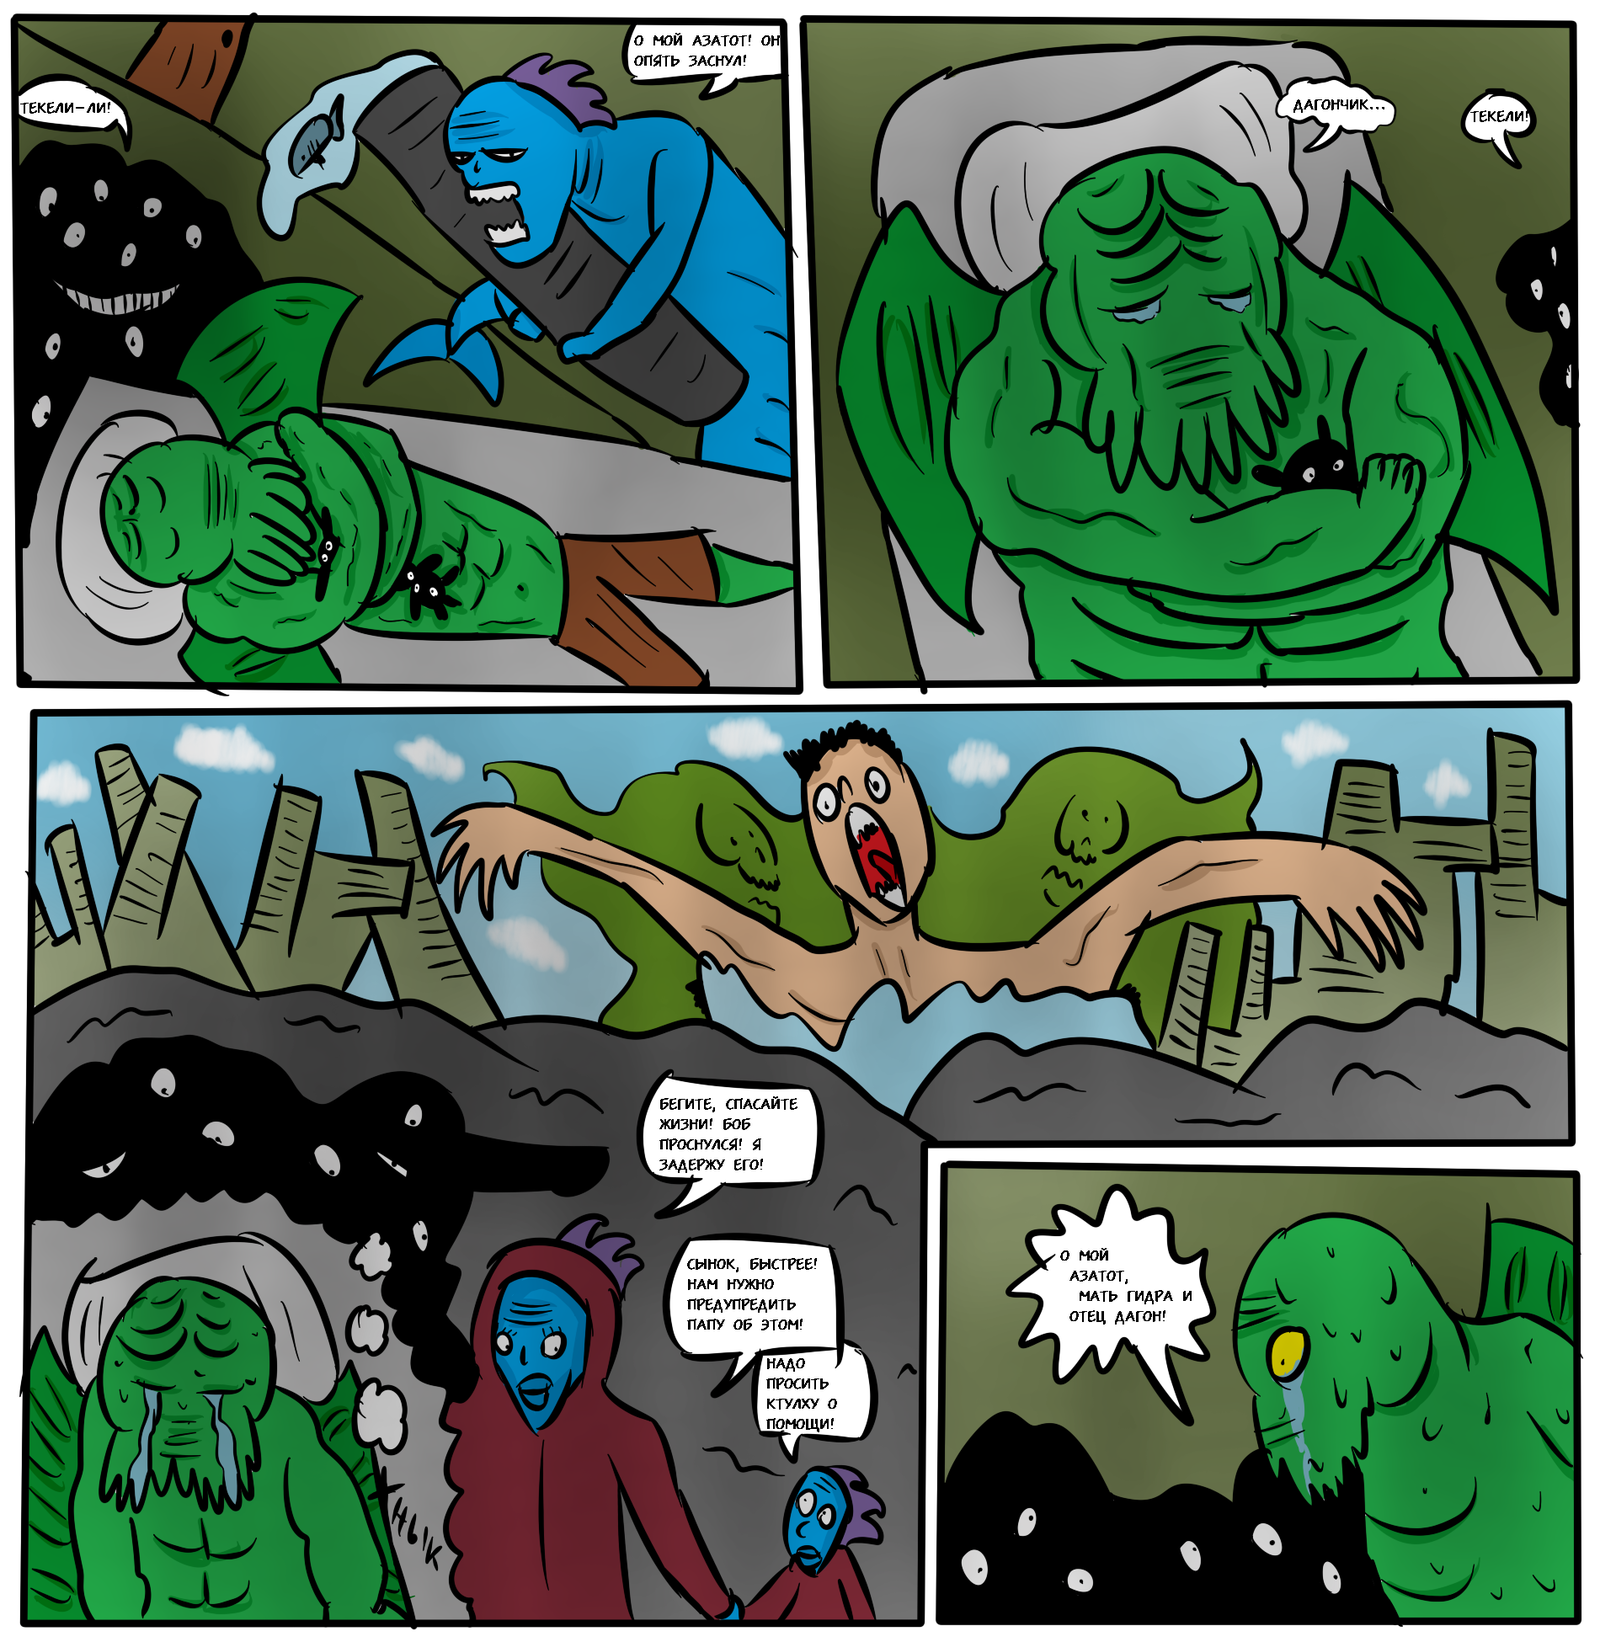 Cthulhu can suck my dick